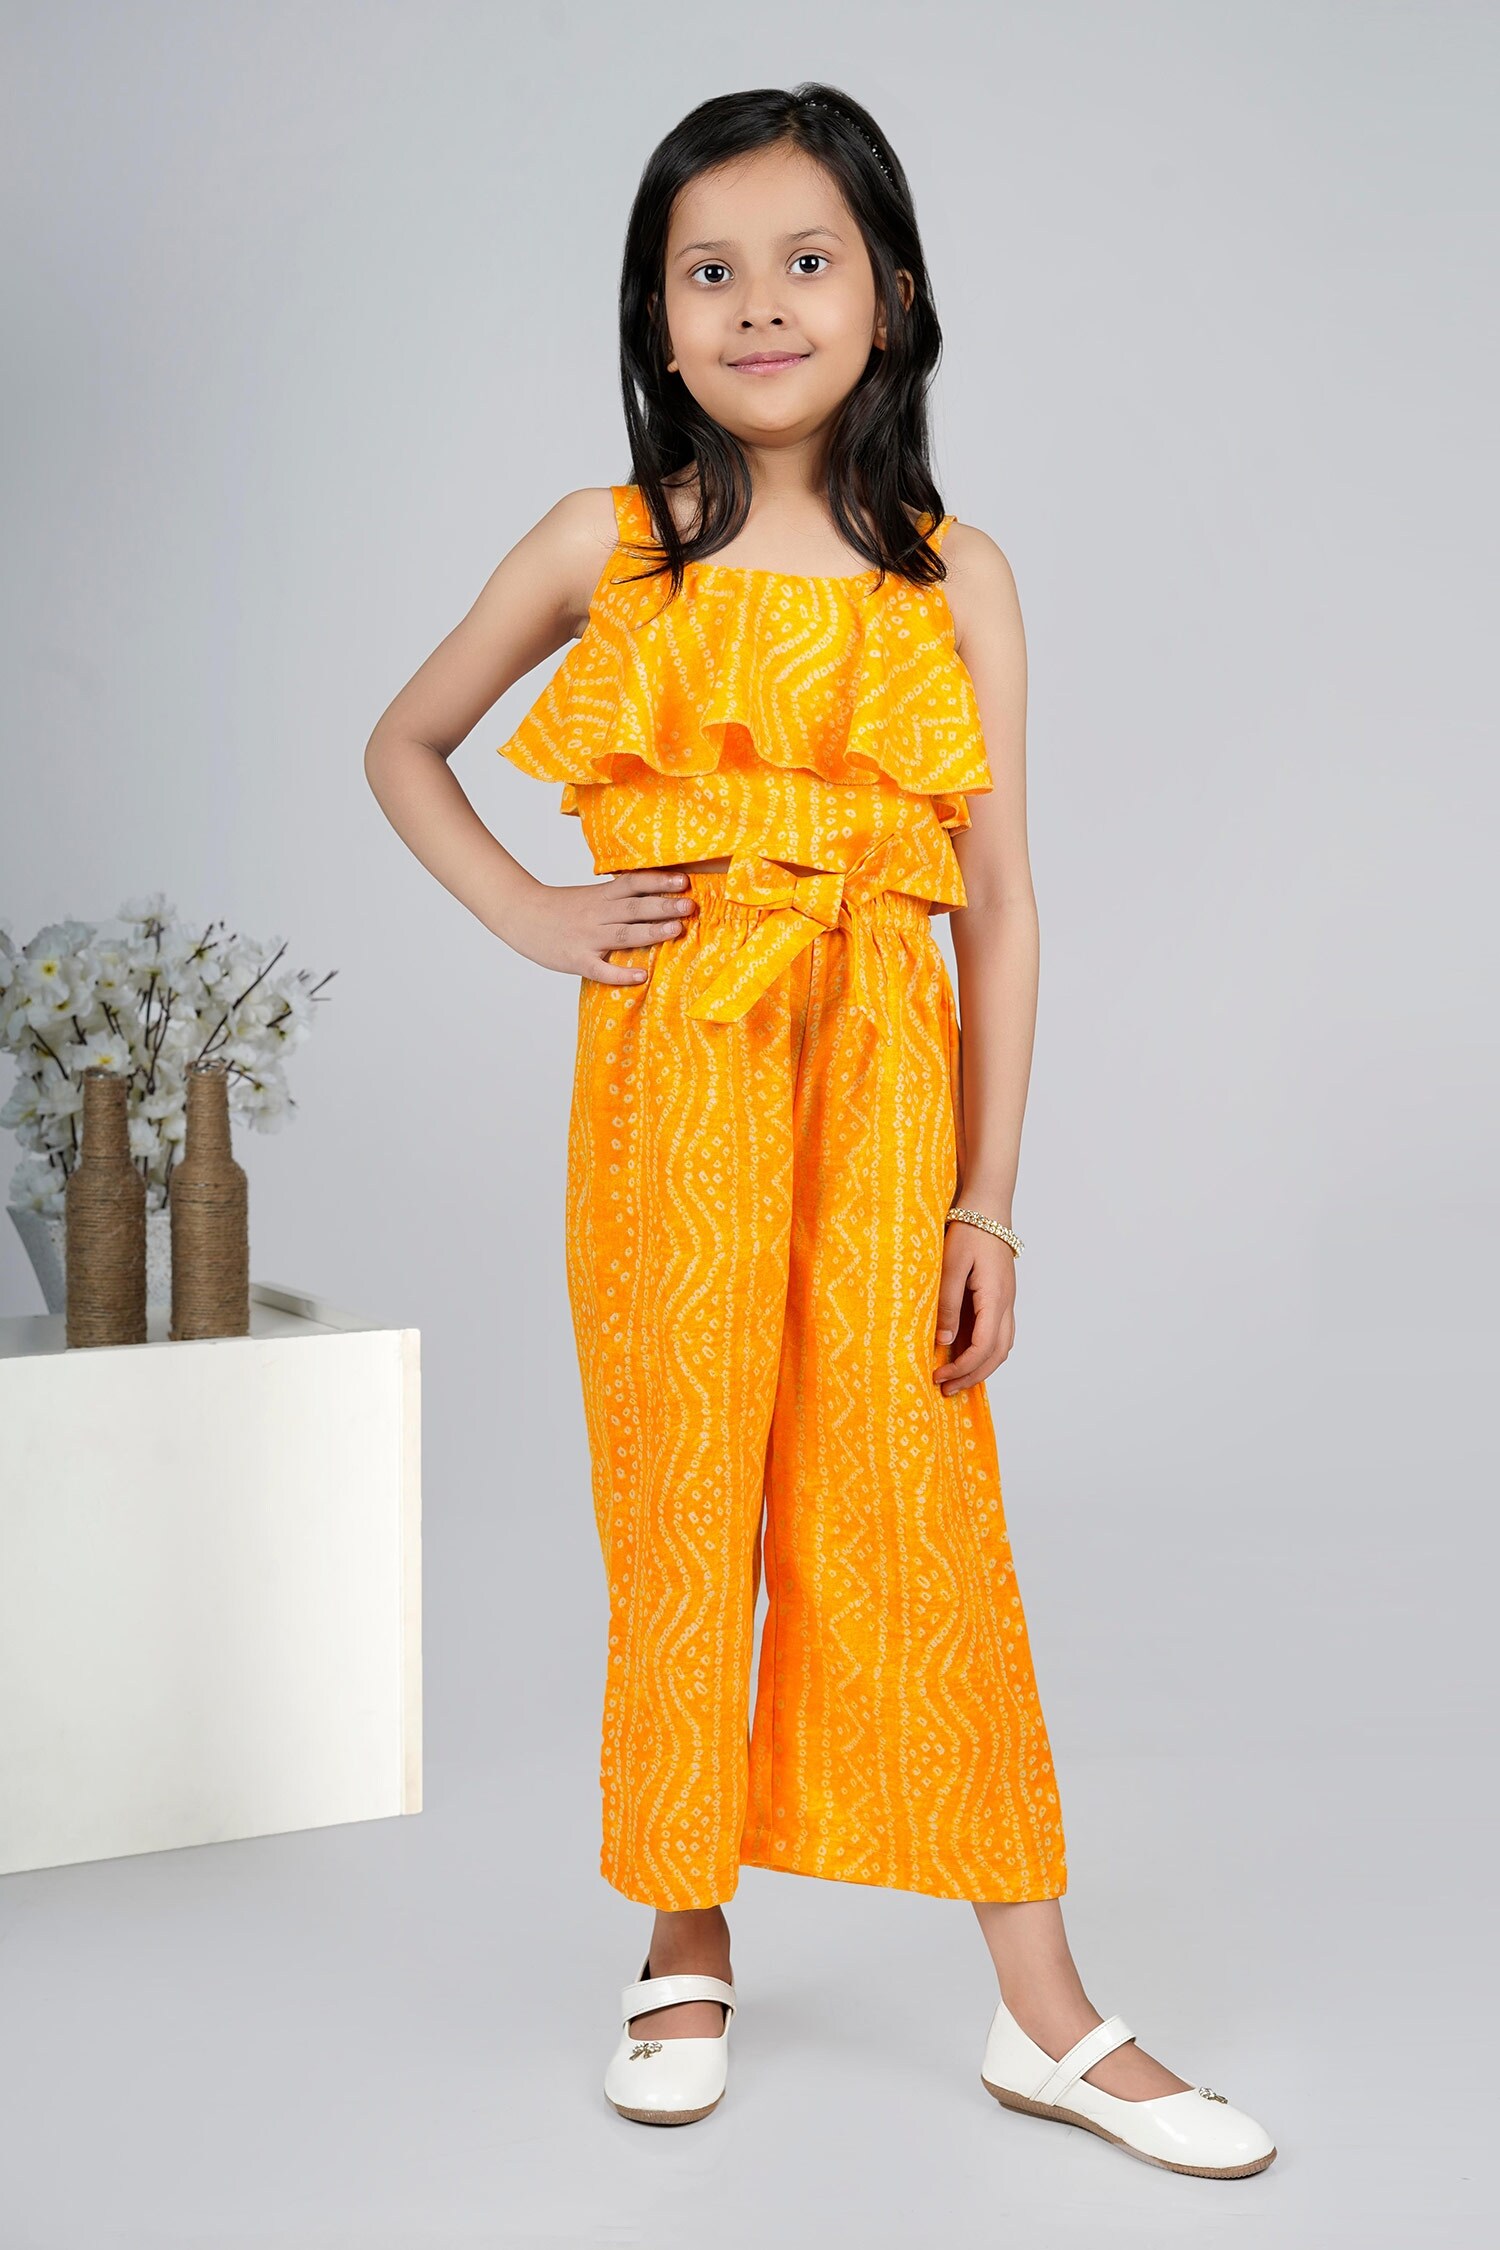 Jelly Jones Yellow Bandhani Print Top And Culottes Set For Girls